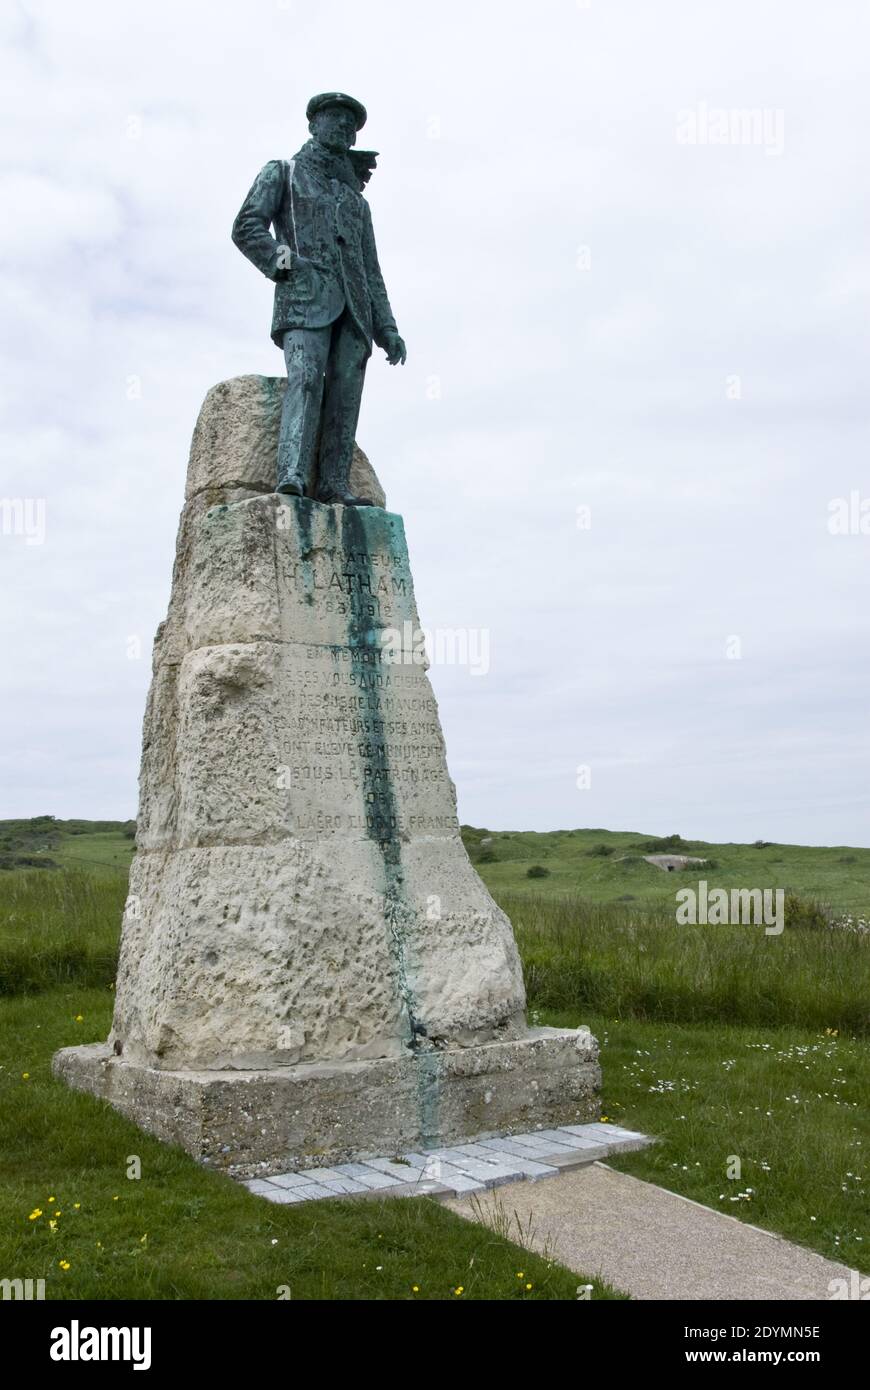 A monument to French aviator, Hubert Latham, stands near Cap Blanc Nez (Cape White Nose), a cape on the Cote d'Opale, Pas-de-Calais, northern France. Stock Photo